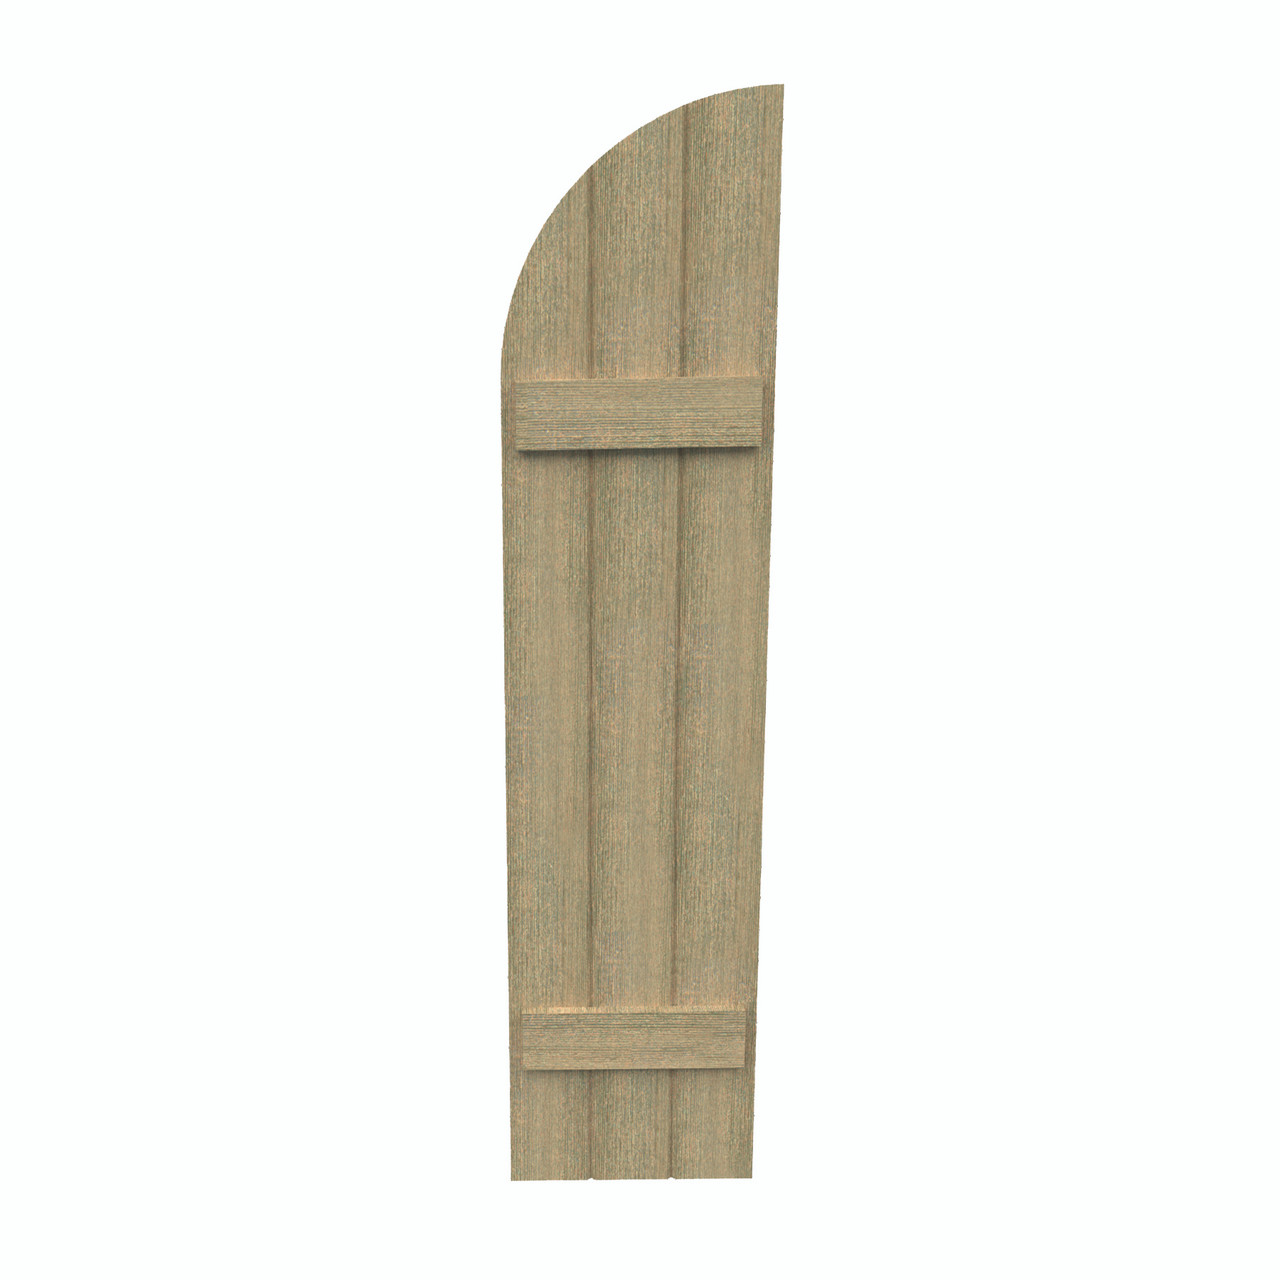 18 inch by 75 inch Quarter Round Shutter with 3-Boards